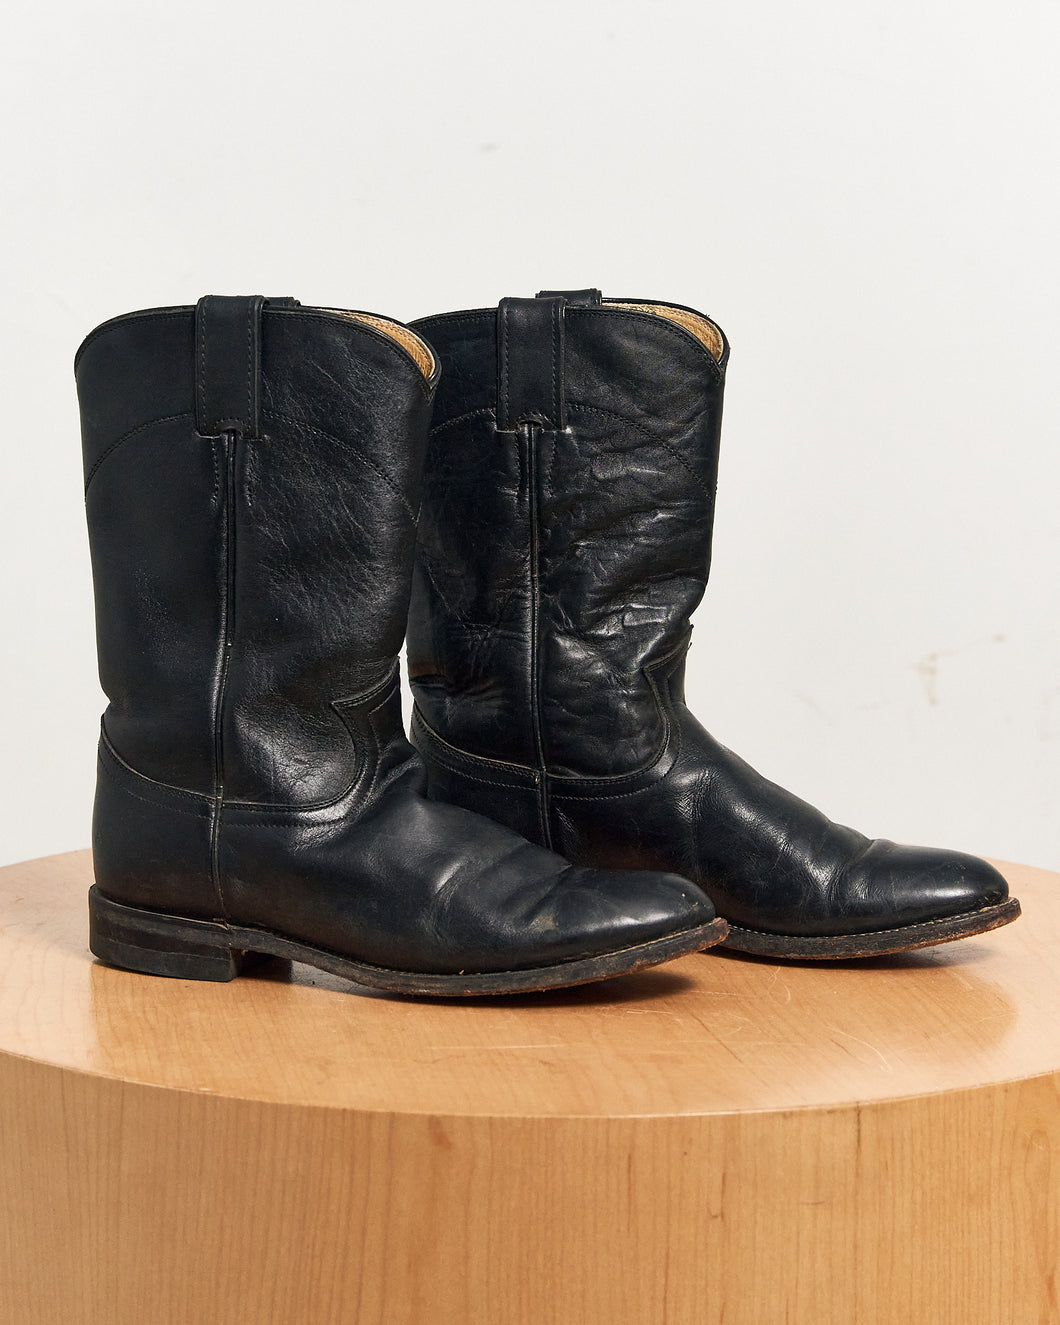 Justin Boots - Black leather Size 7